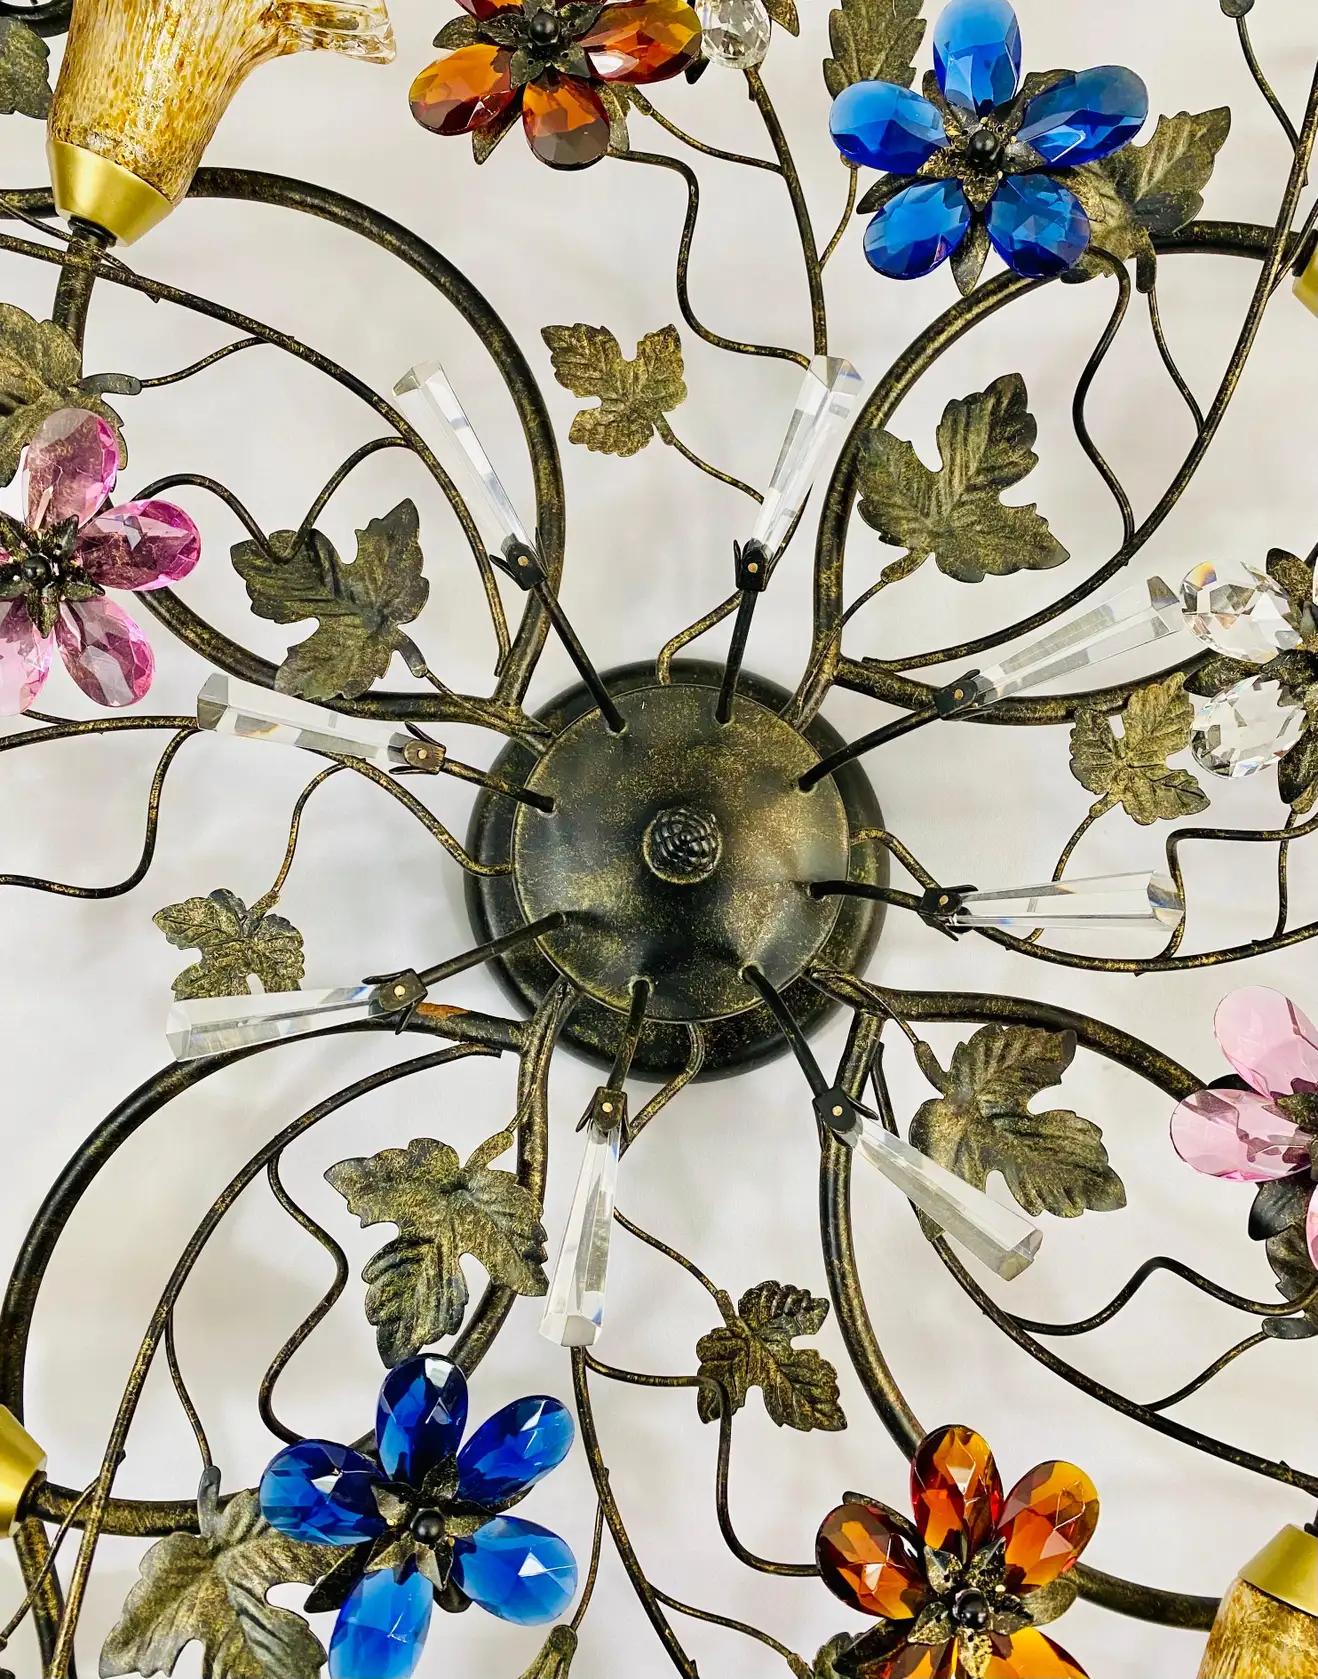 An exquisite wide flowers and leaves Bohemian style ceiling lighting or chandelier. The chandelier features multi-color flowers in faux crystal and leaves in a adardk bronzed tone. The chandelier has 4 lights with tulip shaped shades. This whimsical